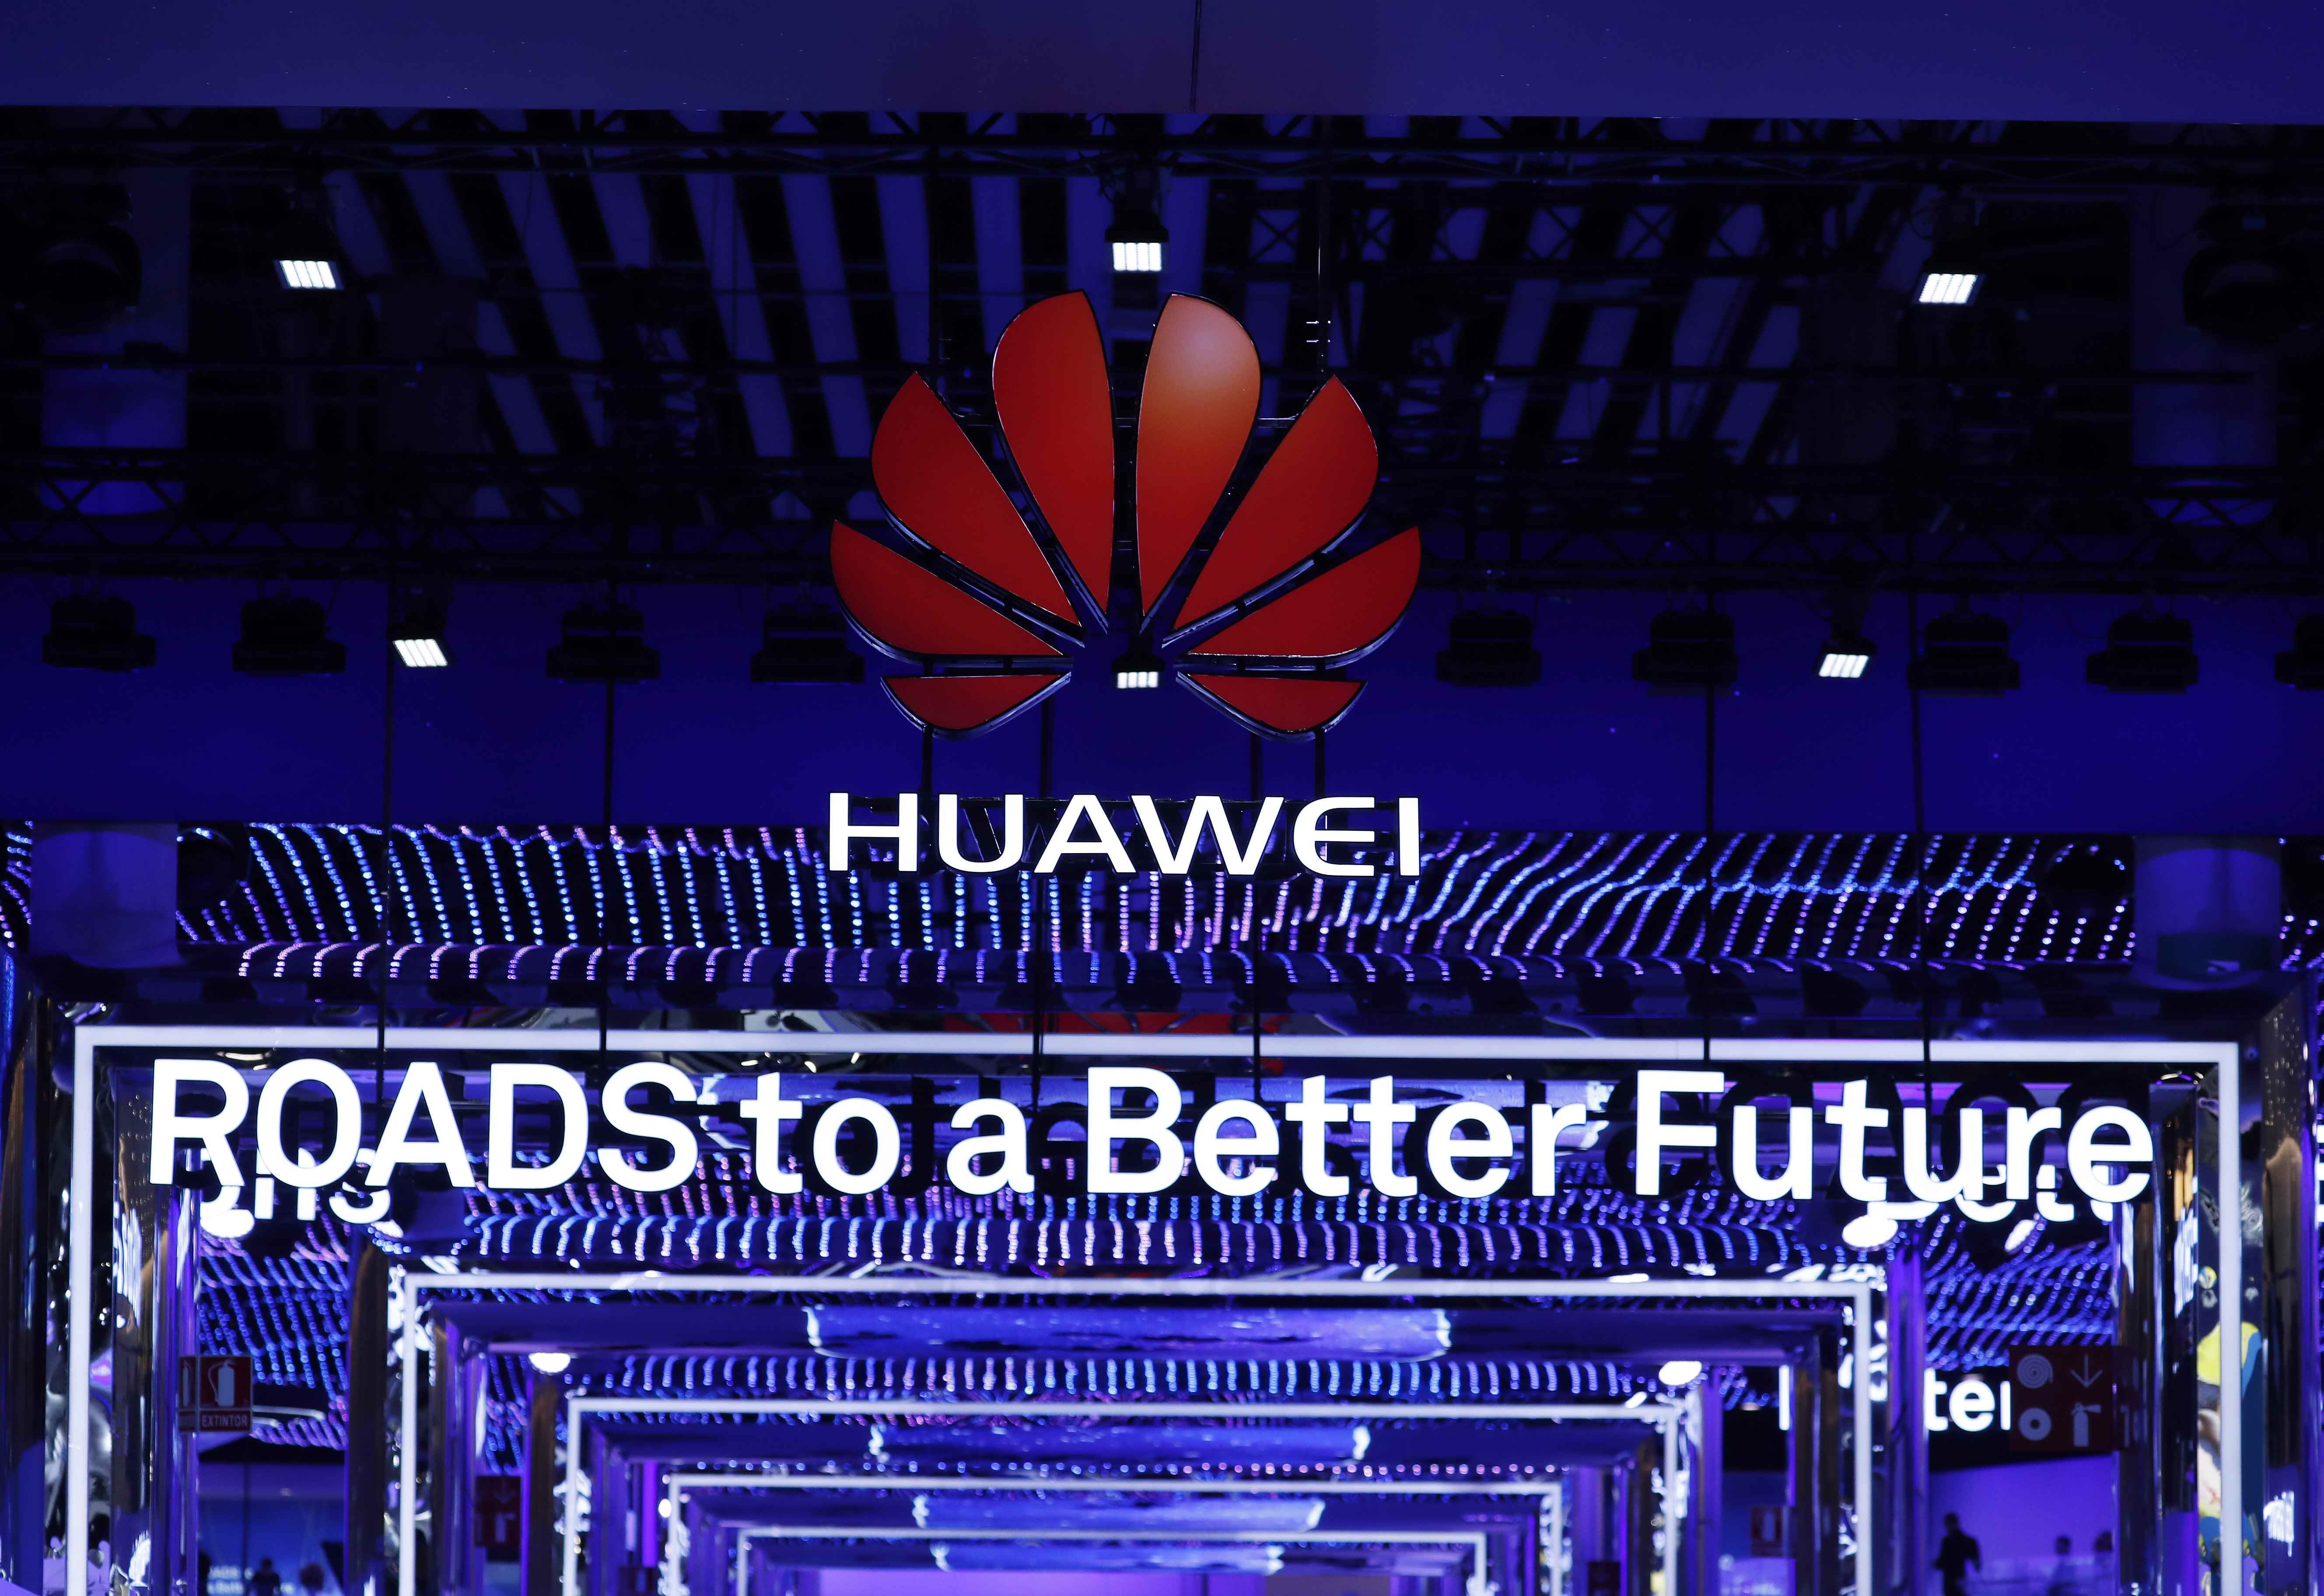 US lawmakers have raised concerns that Huawei’s ties to the Chinese government poses a potential national security threat, which the company have denied.